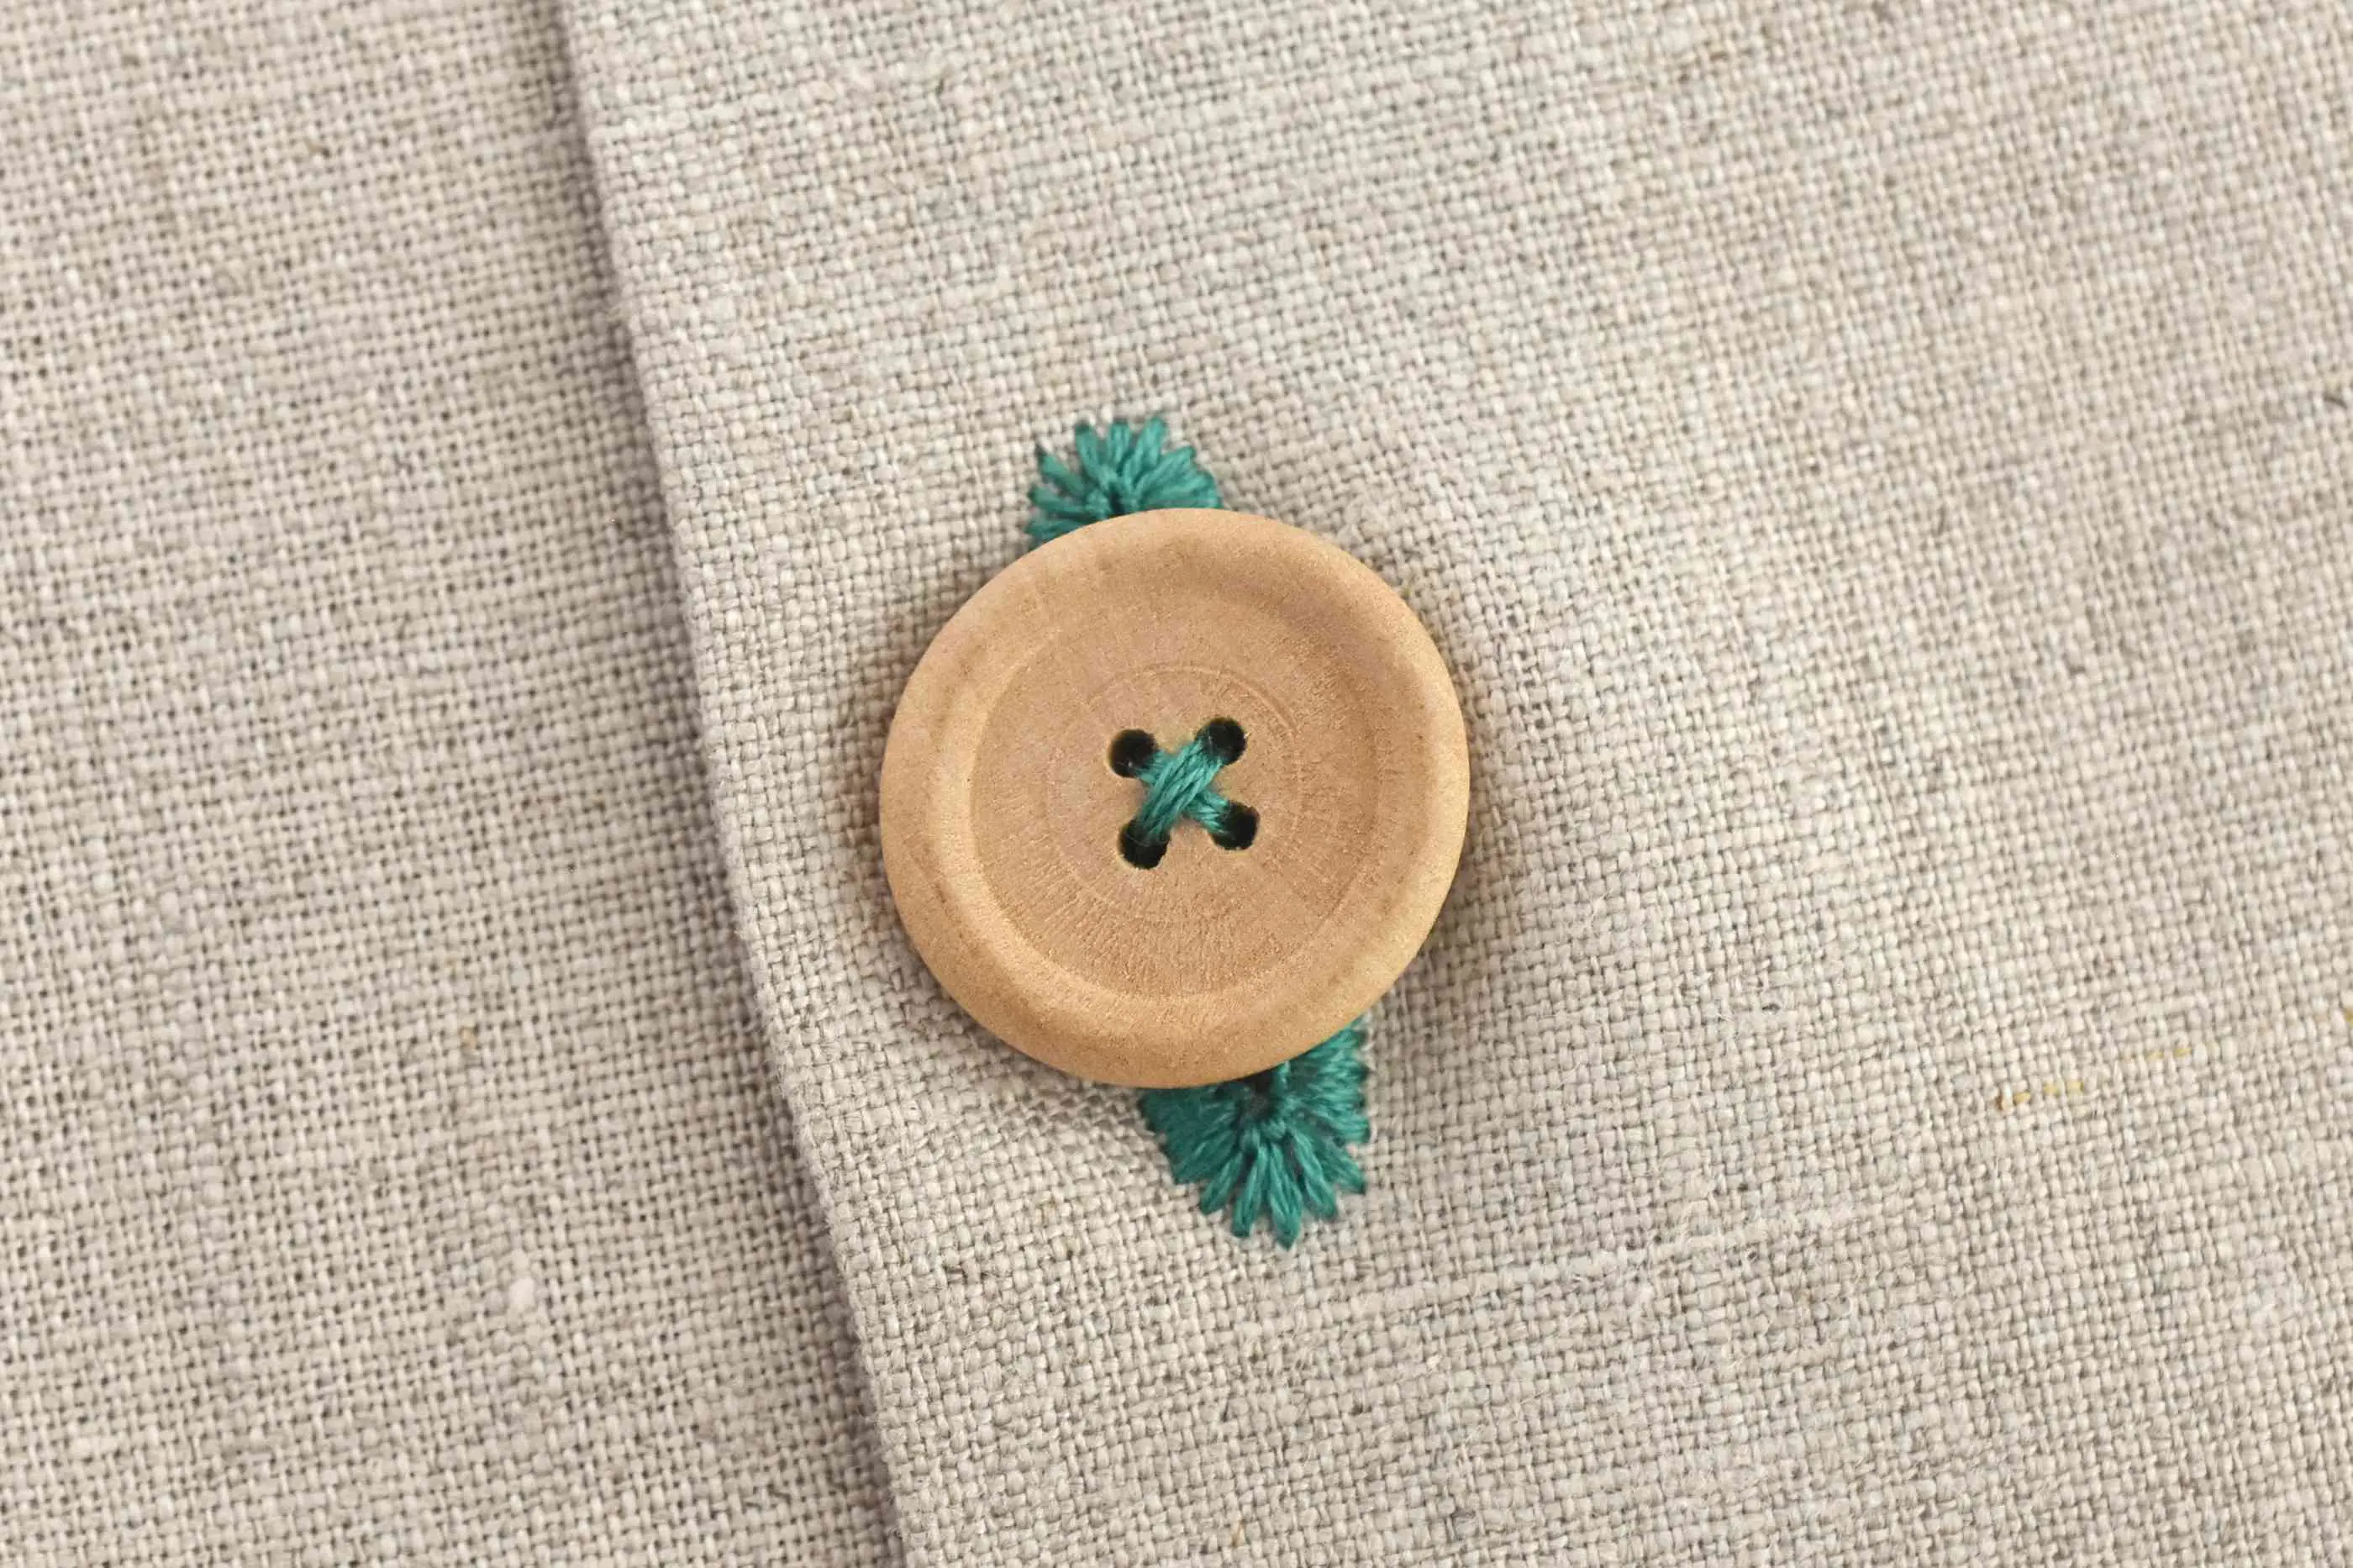 How To Sew On a Button With 2 Holes